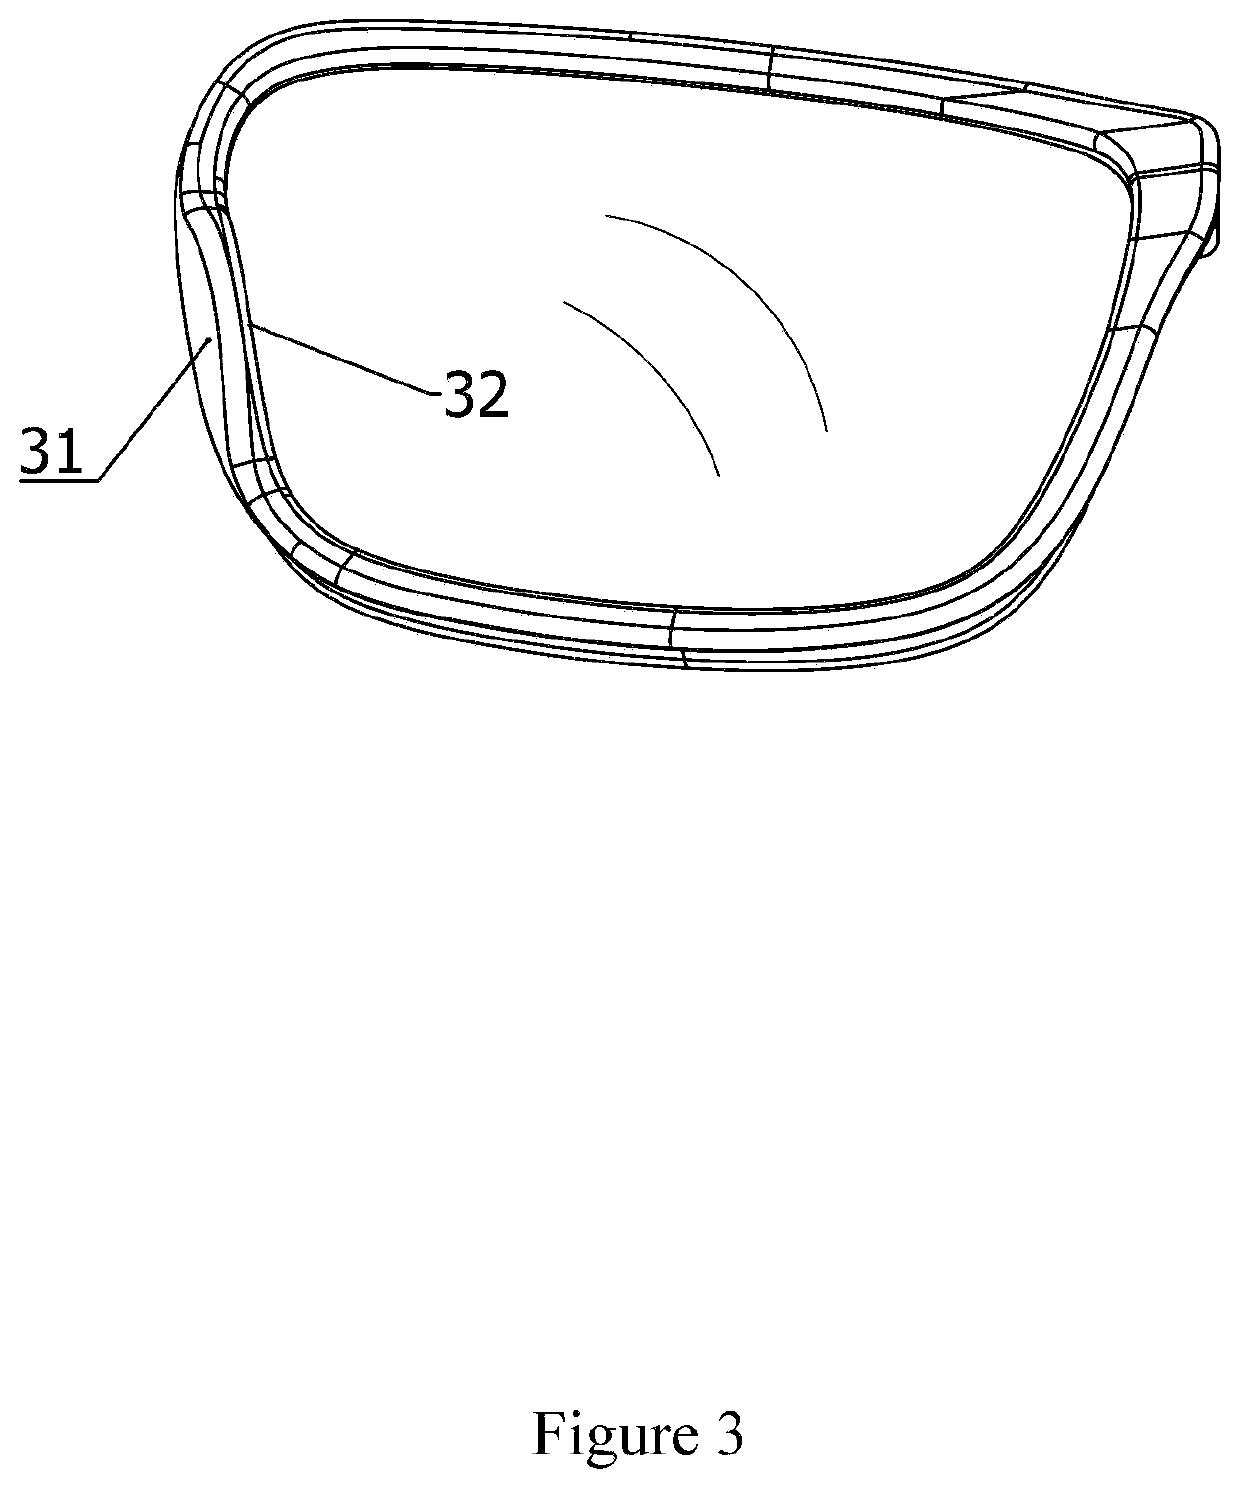 Glasses with replaceable lenses